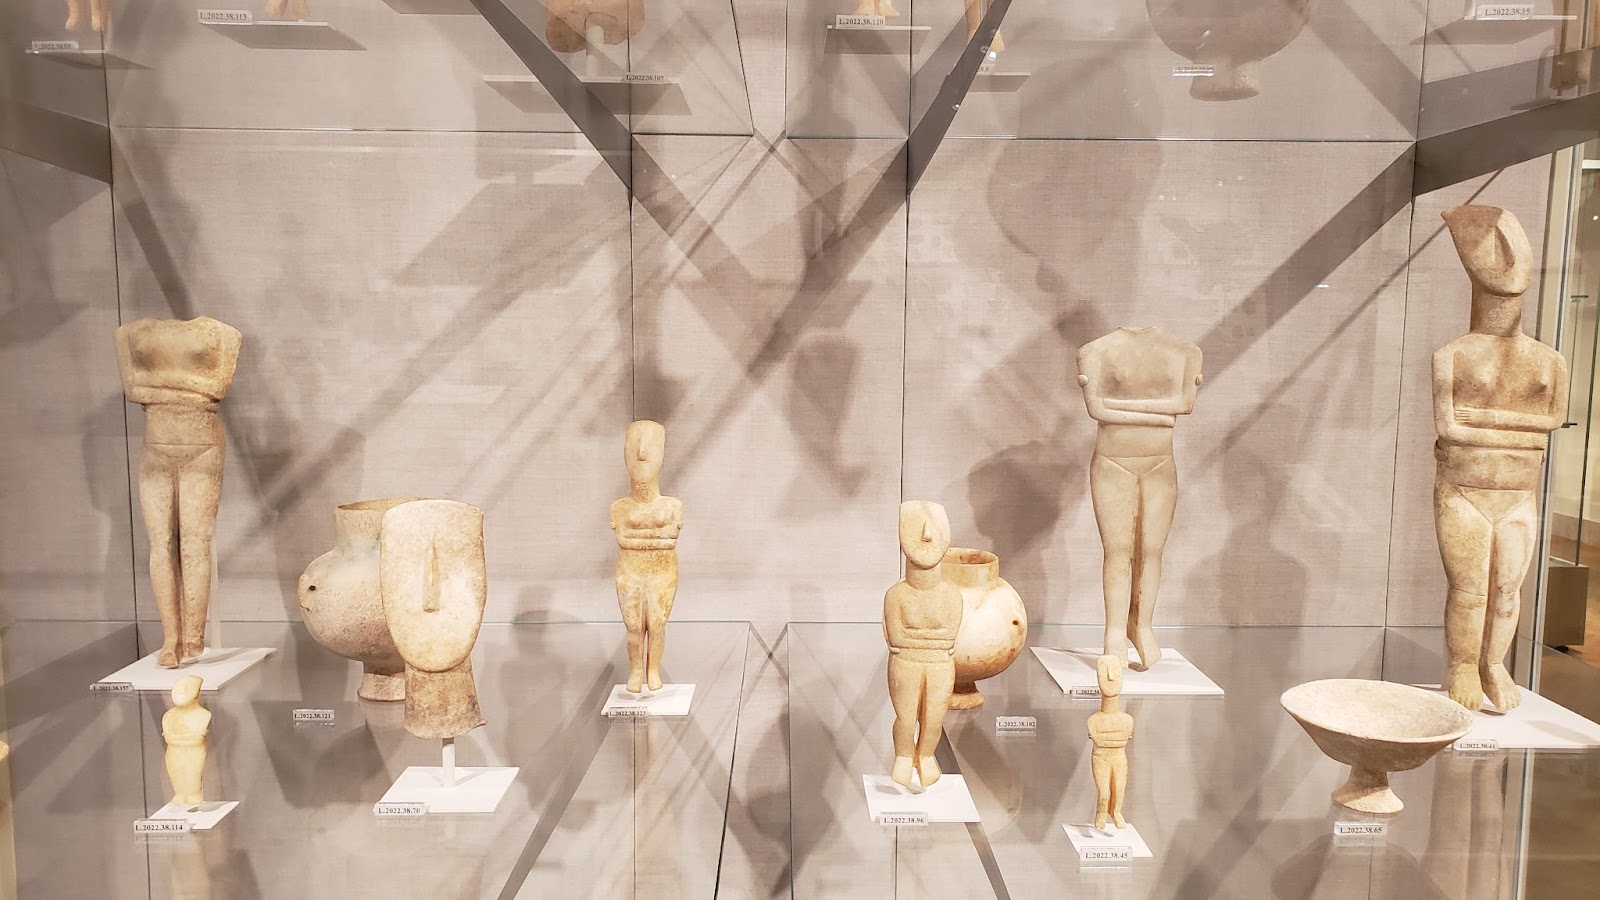 On the second floor of the Greek and Roman section, a smaller collection of figures are collected.